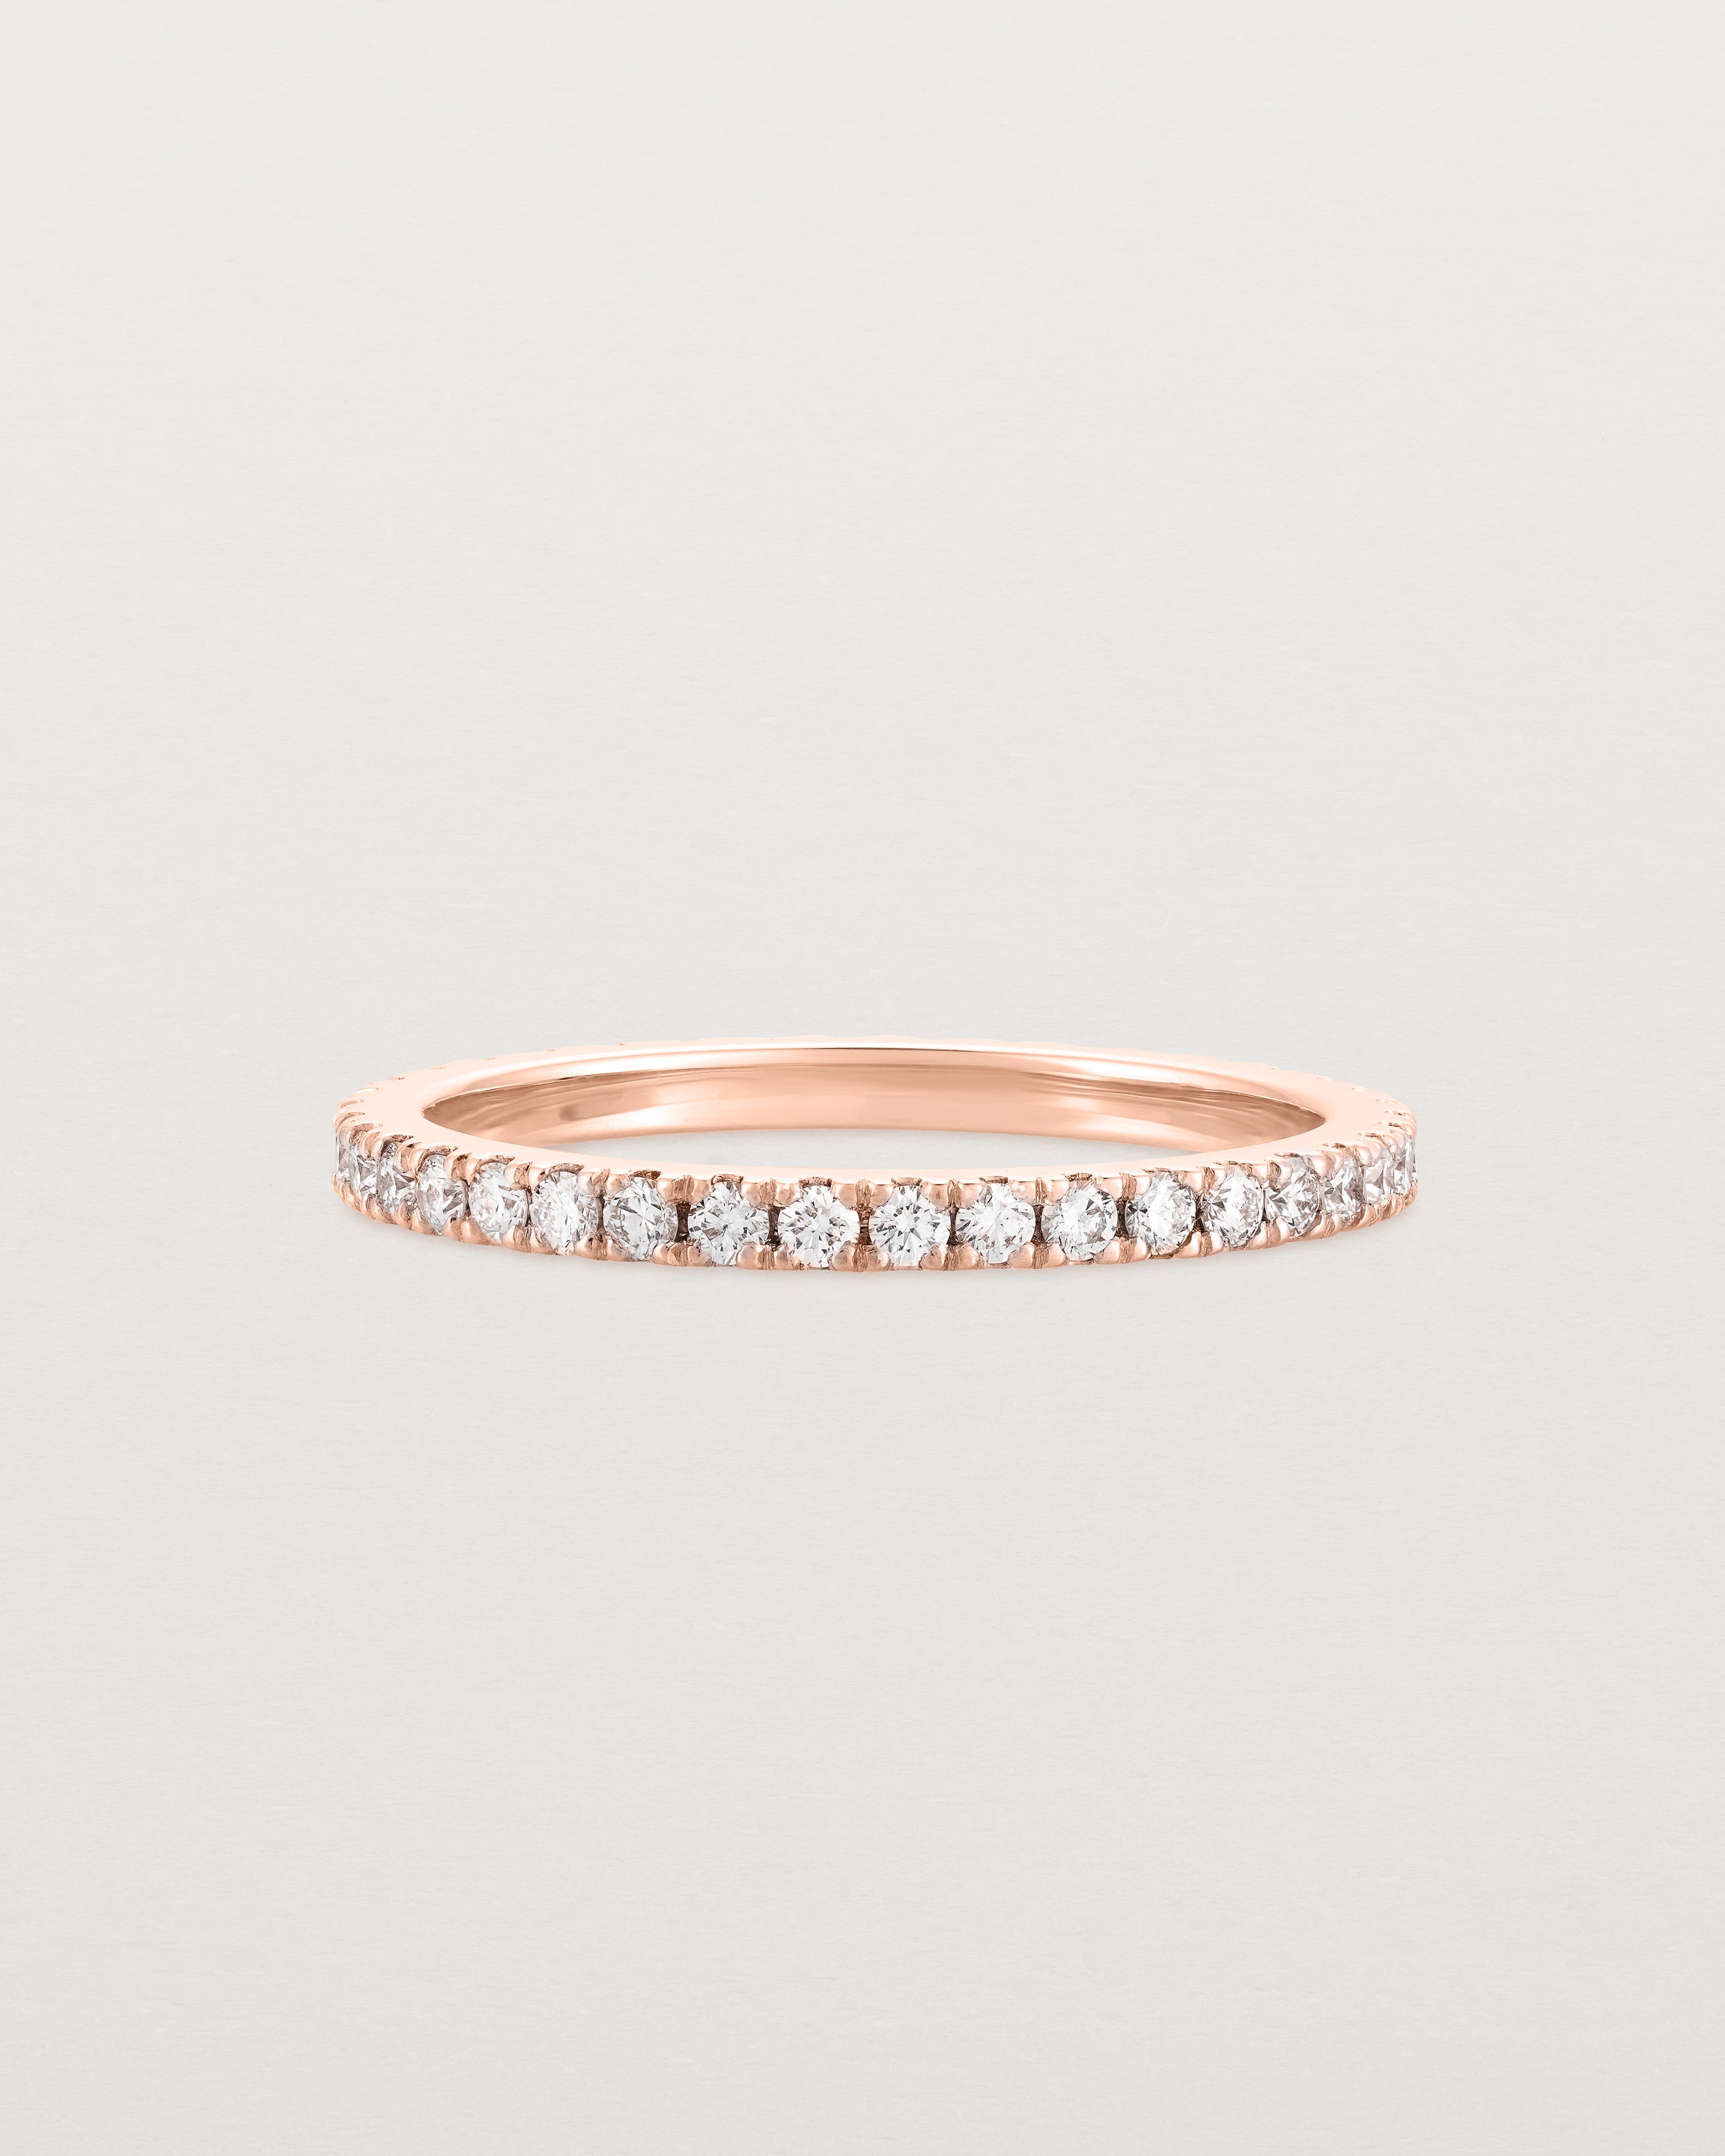 A rose gold band with white diamonds